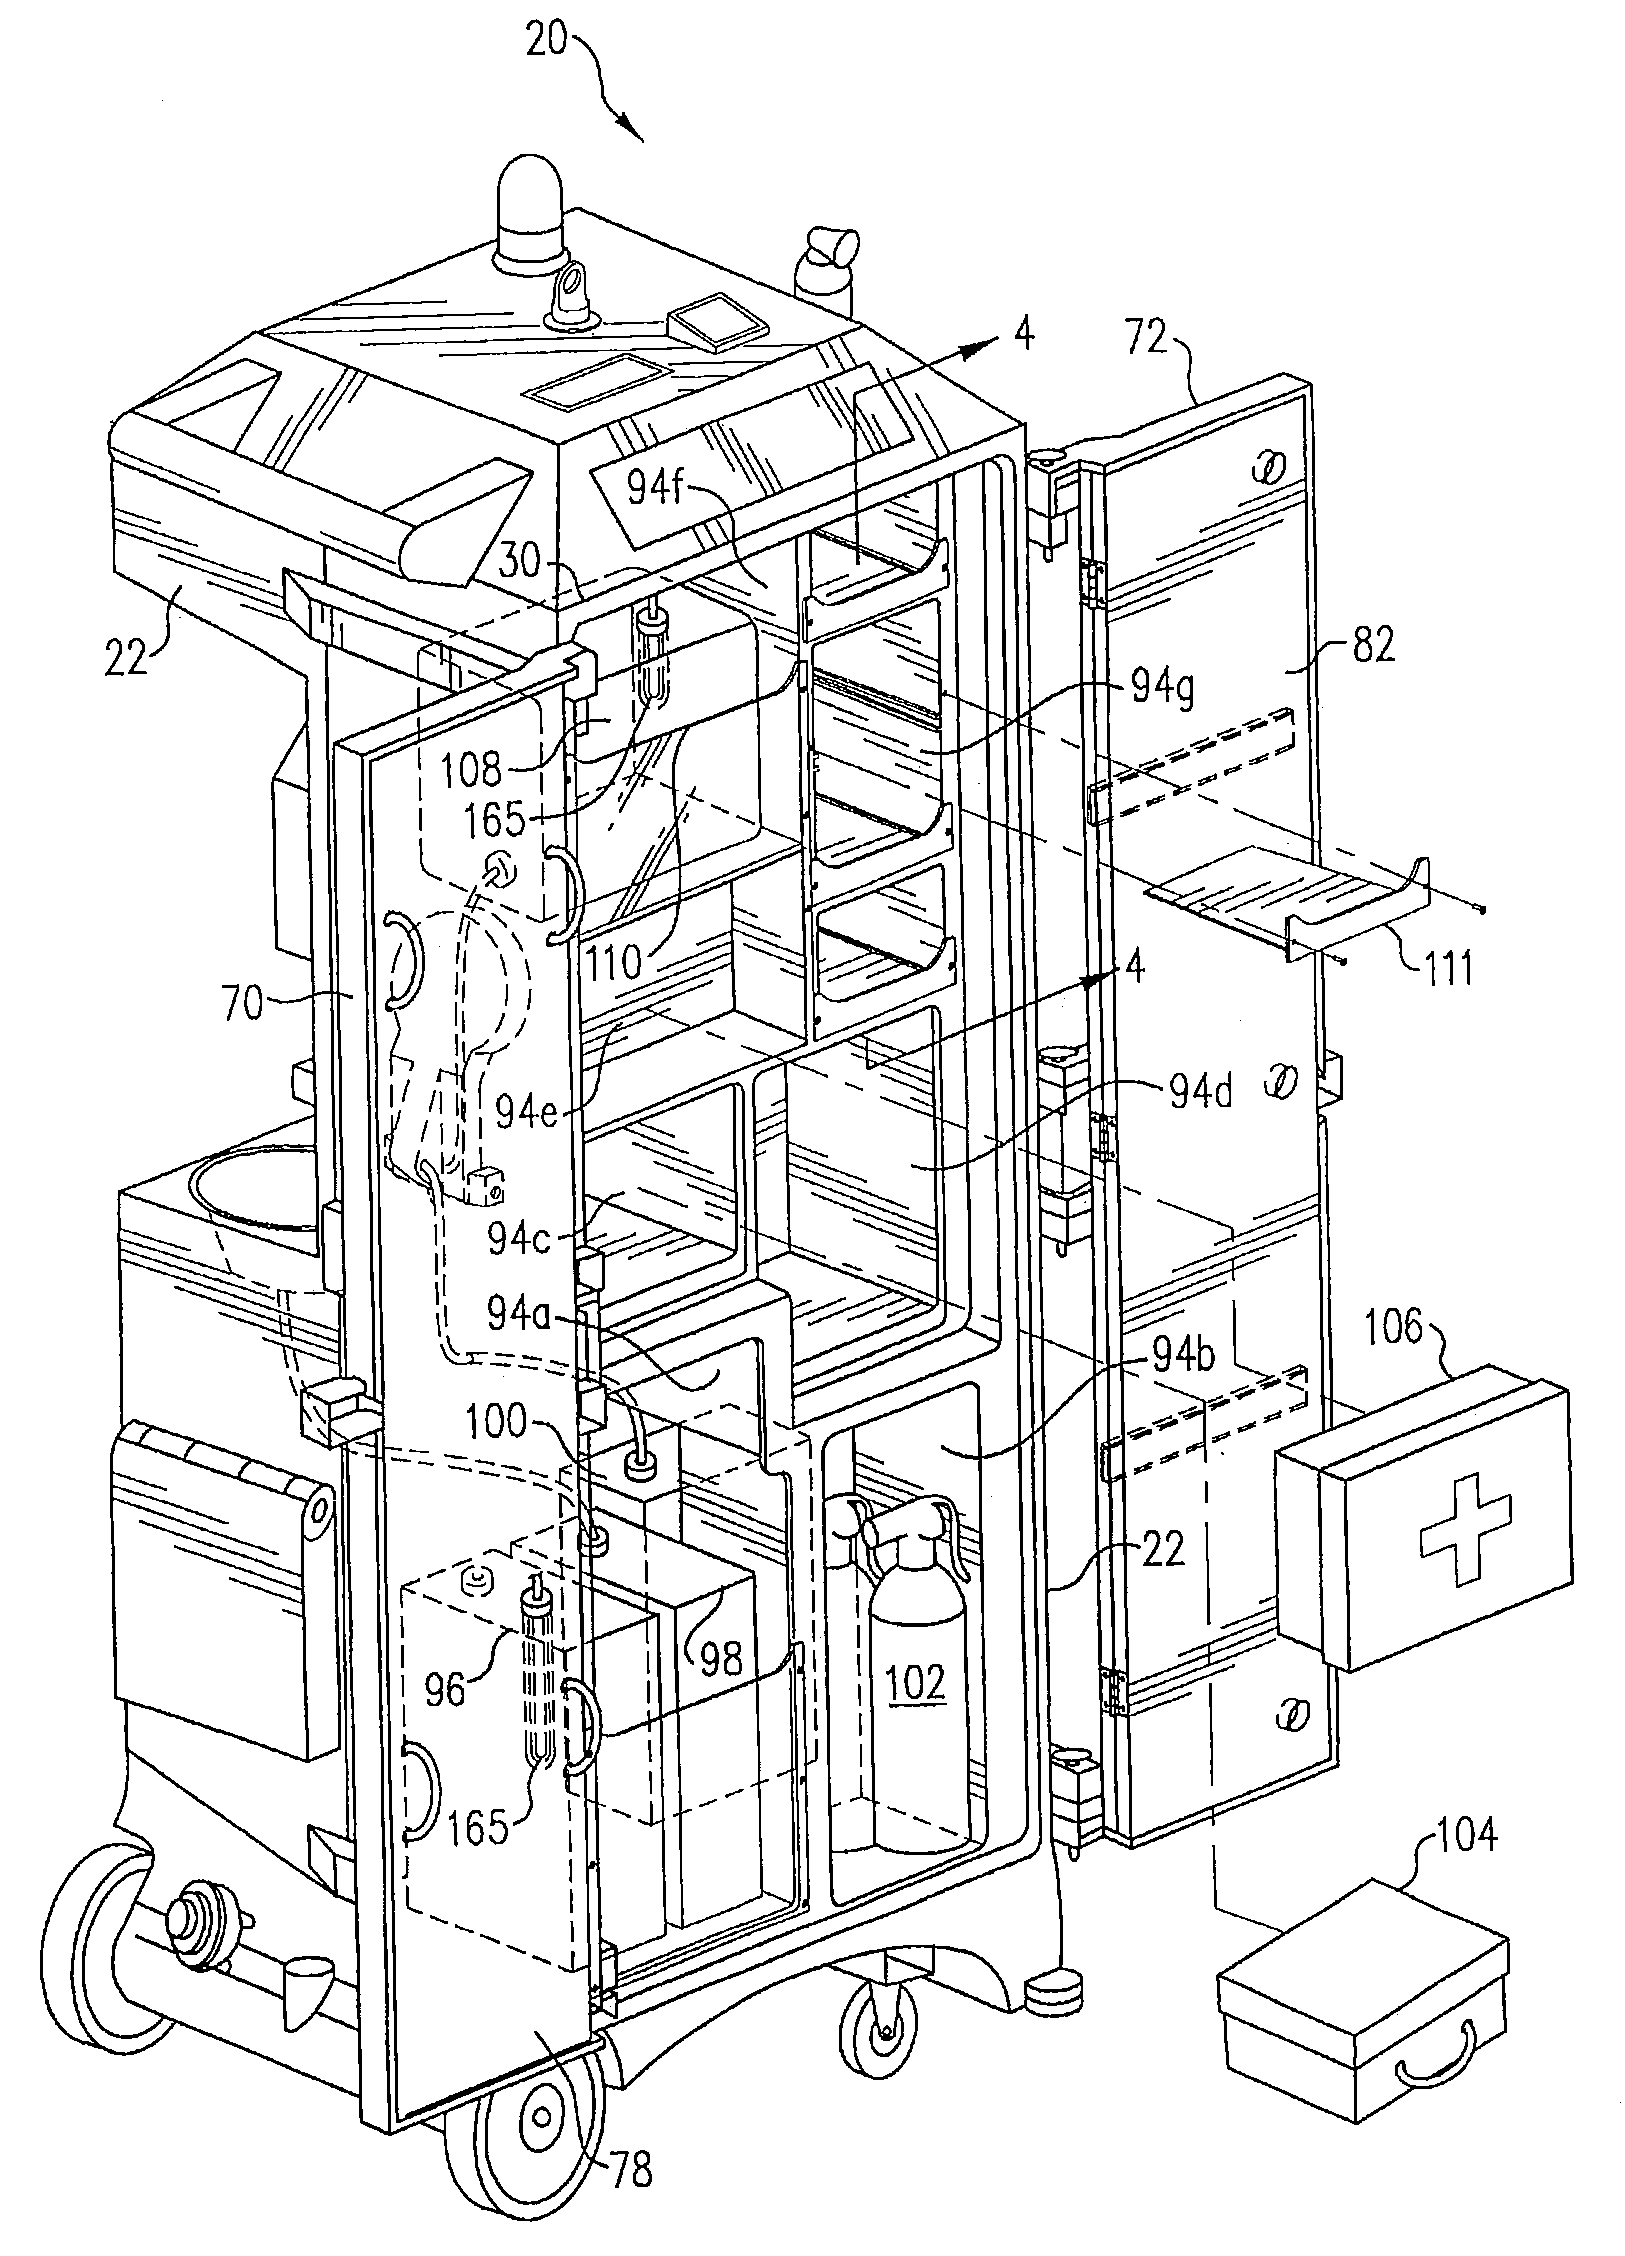 Mobile safety compliance apparatus